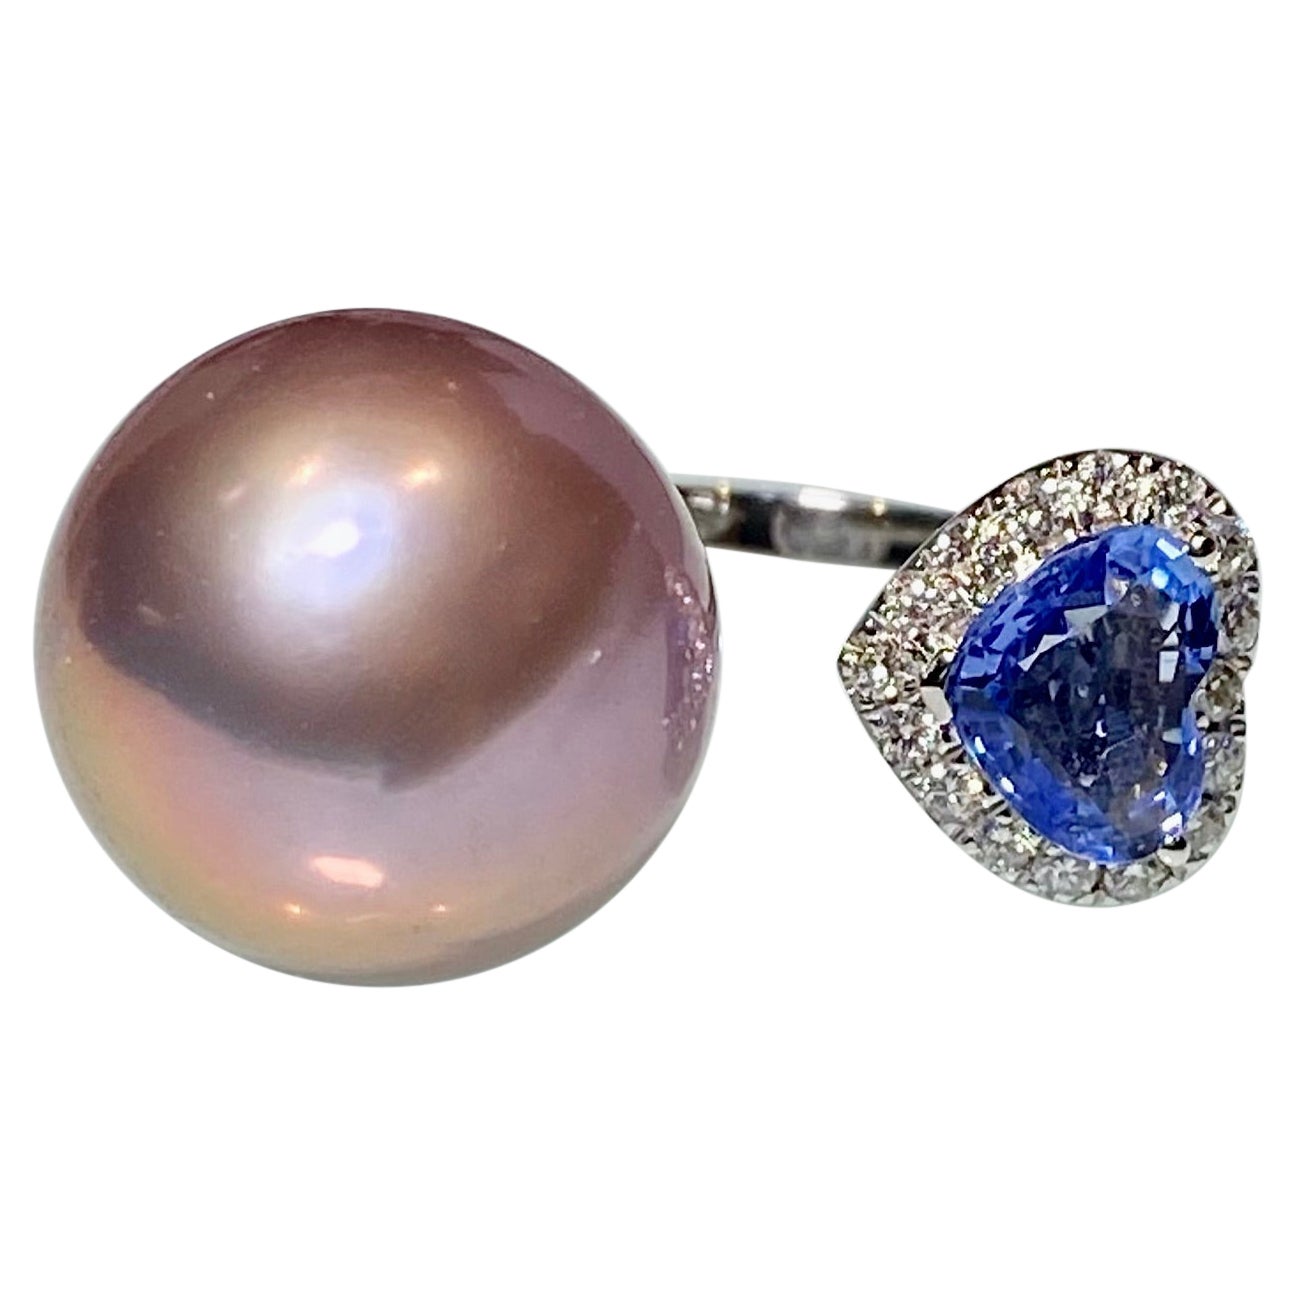 Eostre Lavender Colour Freshwater Pearl, Sapphire and Diamond Ring in 18K Gold